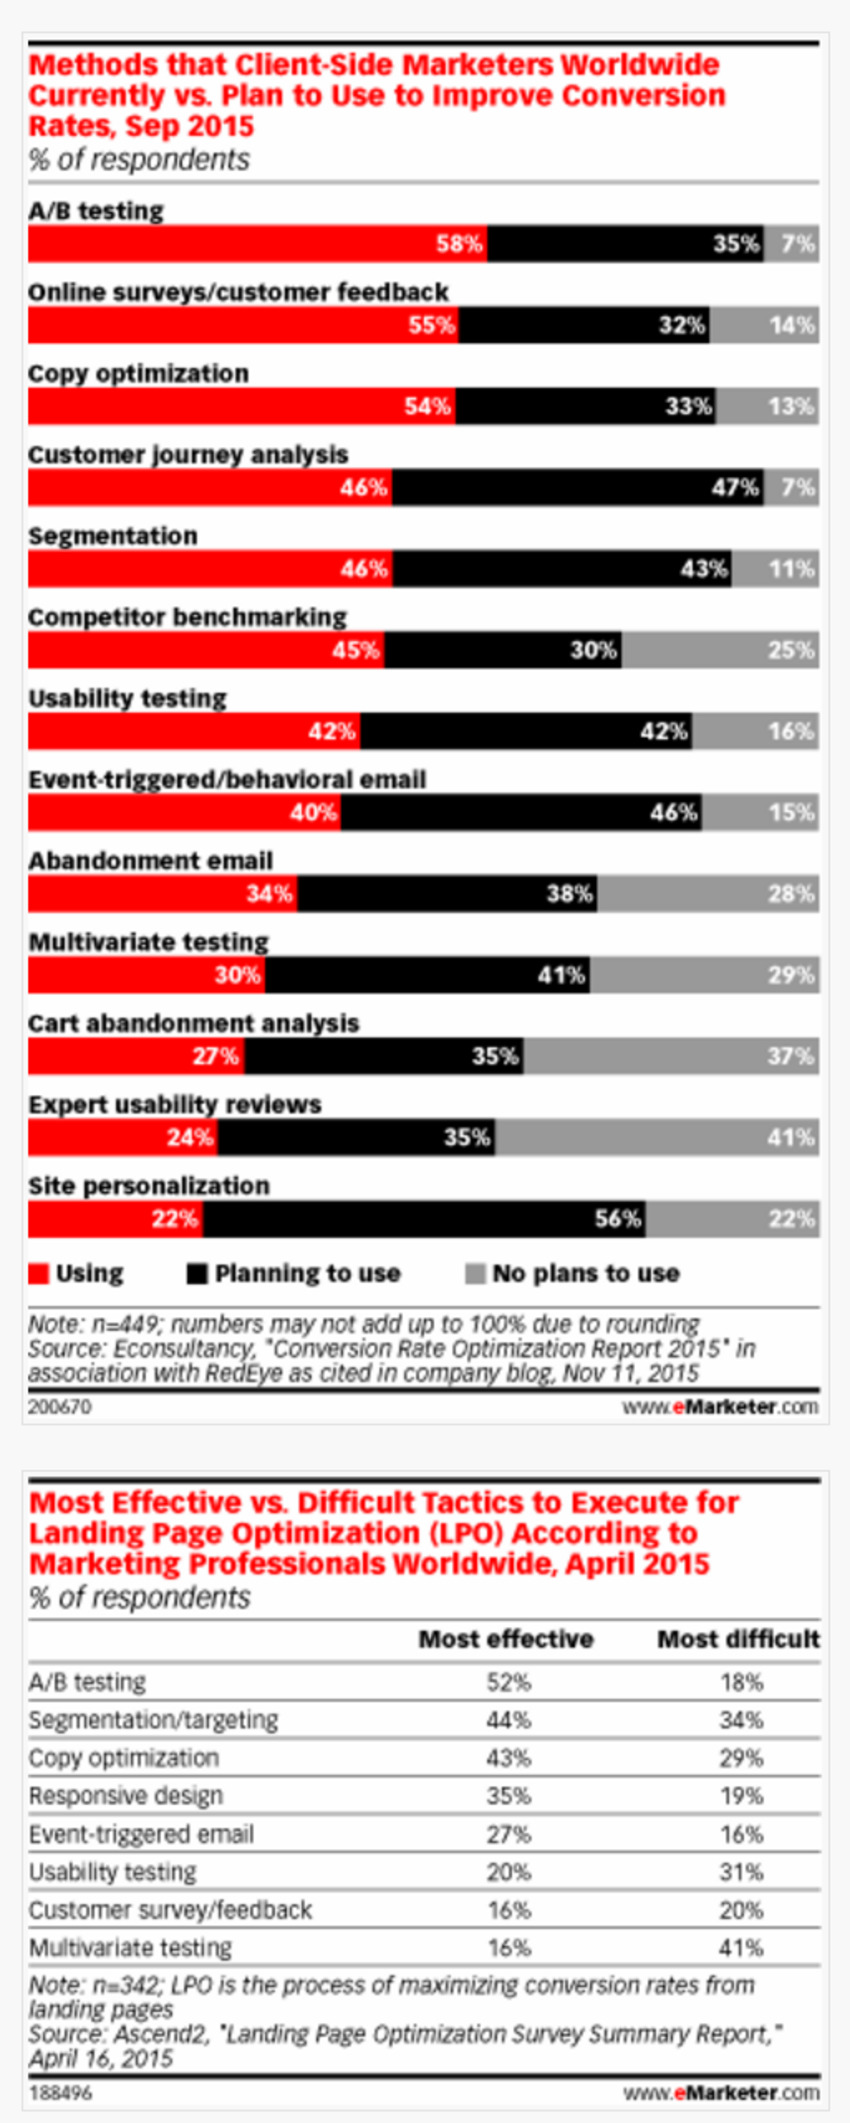 Which Methods Will Help Improve Conversion Rates? - eMarketer | The MarTech Digest | Scoop.it